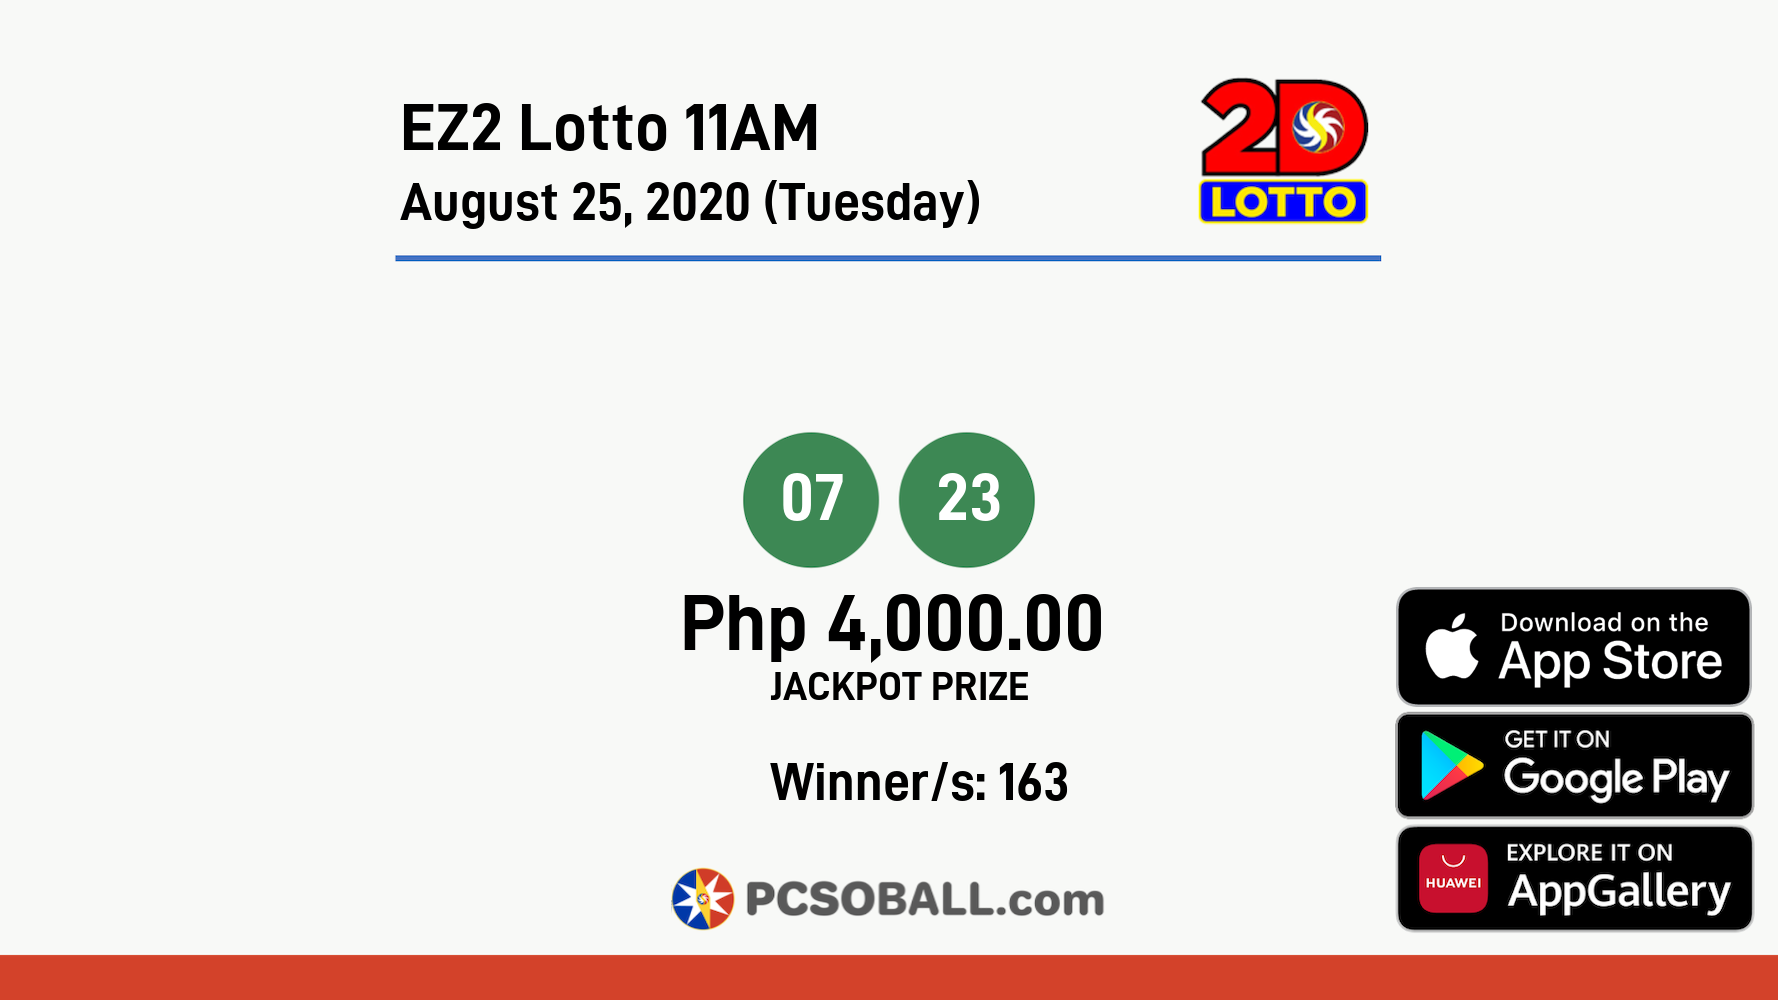 EZ2 Lotto 11AM August 25, 2020 (Tuesday) Result